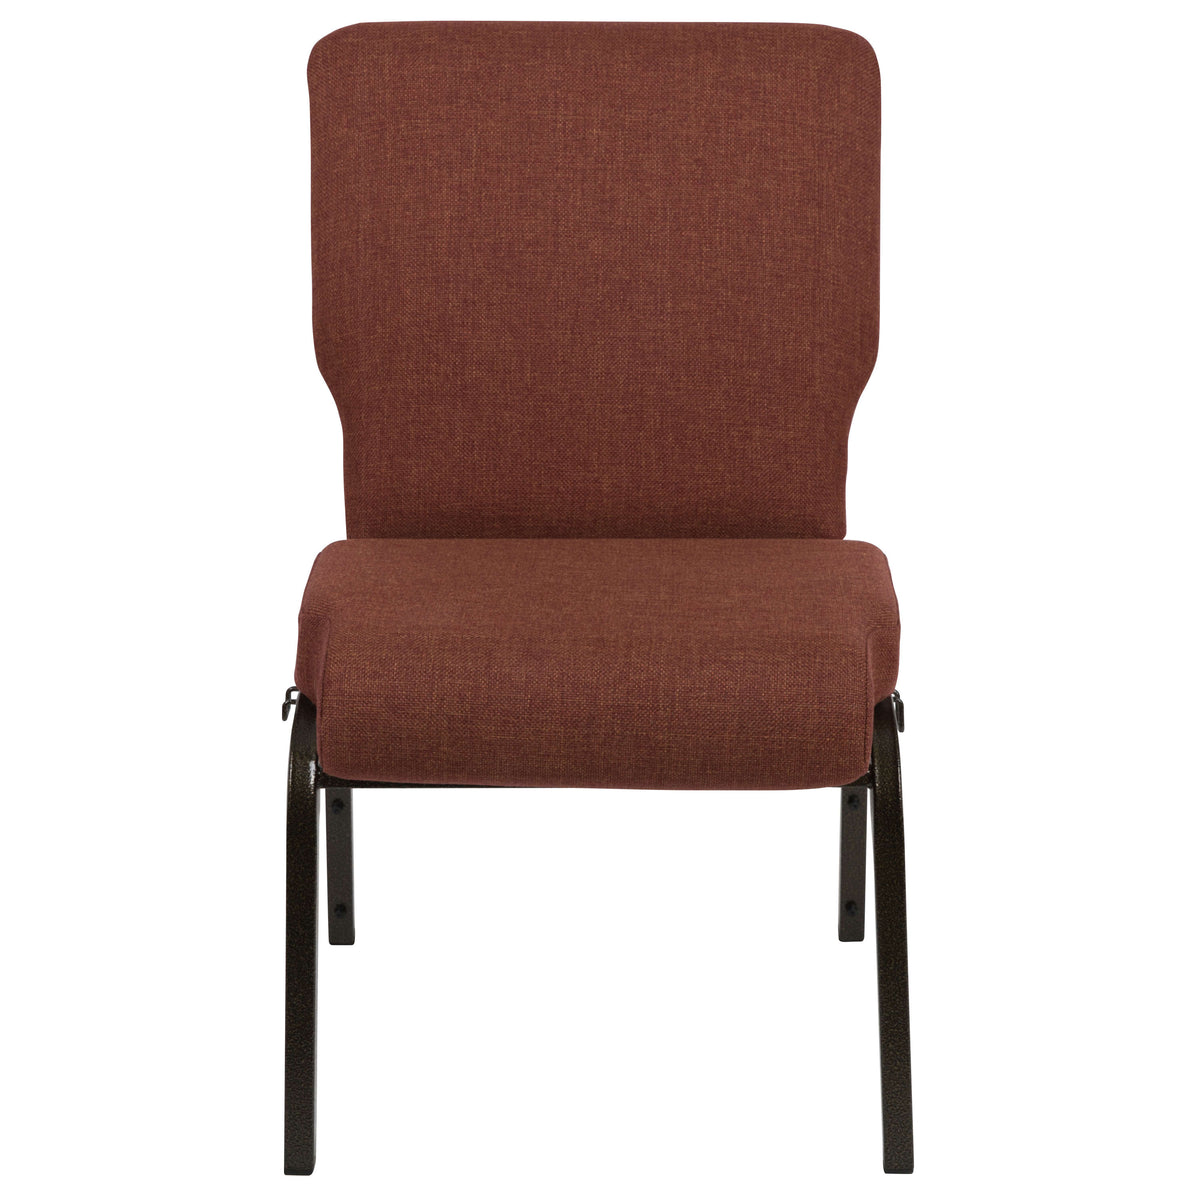 Stacking Auditorium Chair with 20.5inch Seat - Cinnamon Fabric/Gold Vein Frame